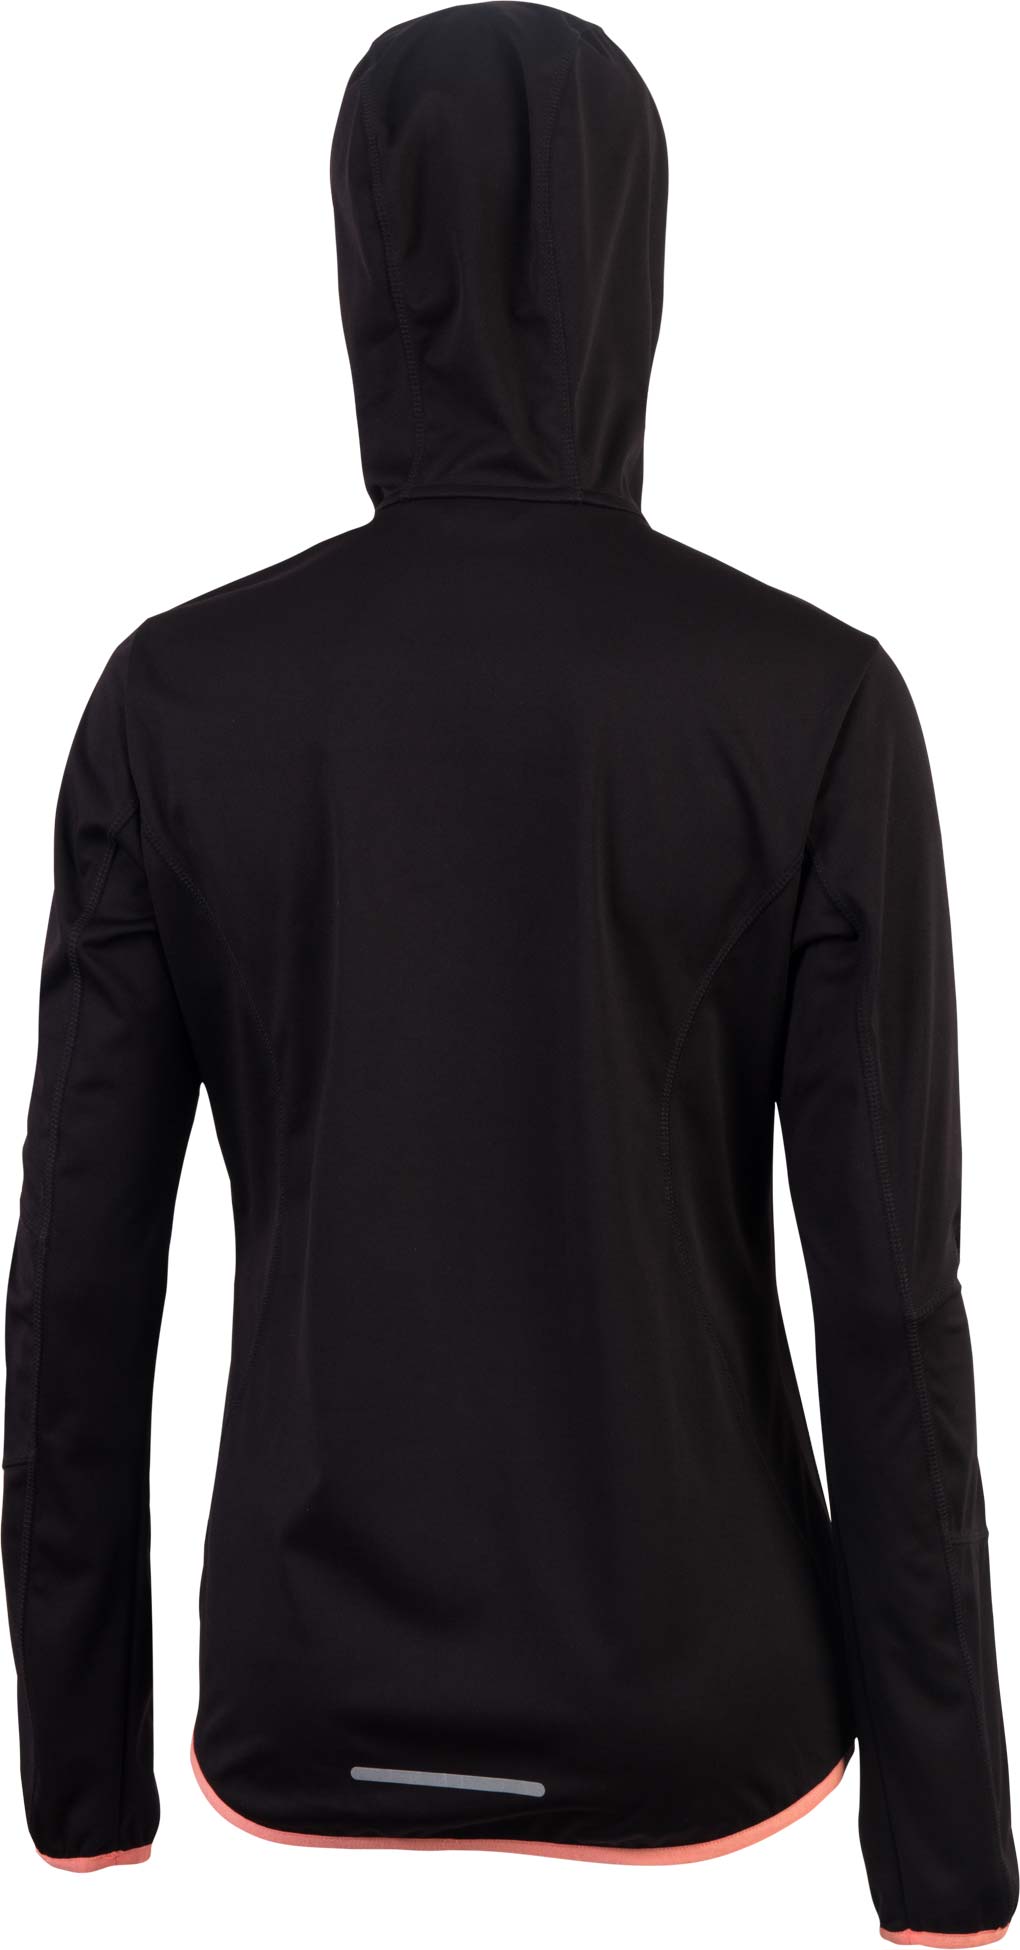 Women’s softshell jacket with a hood